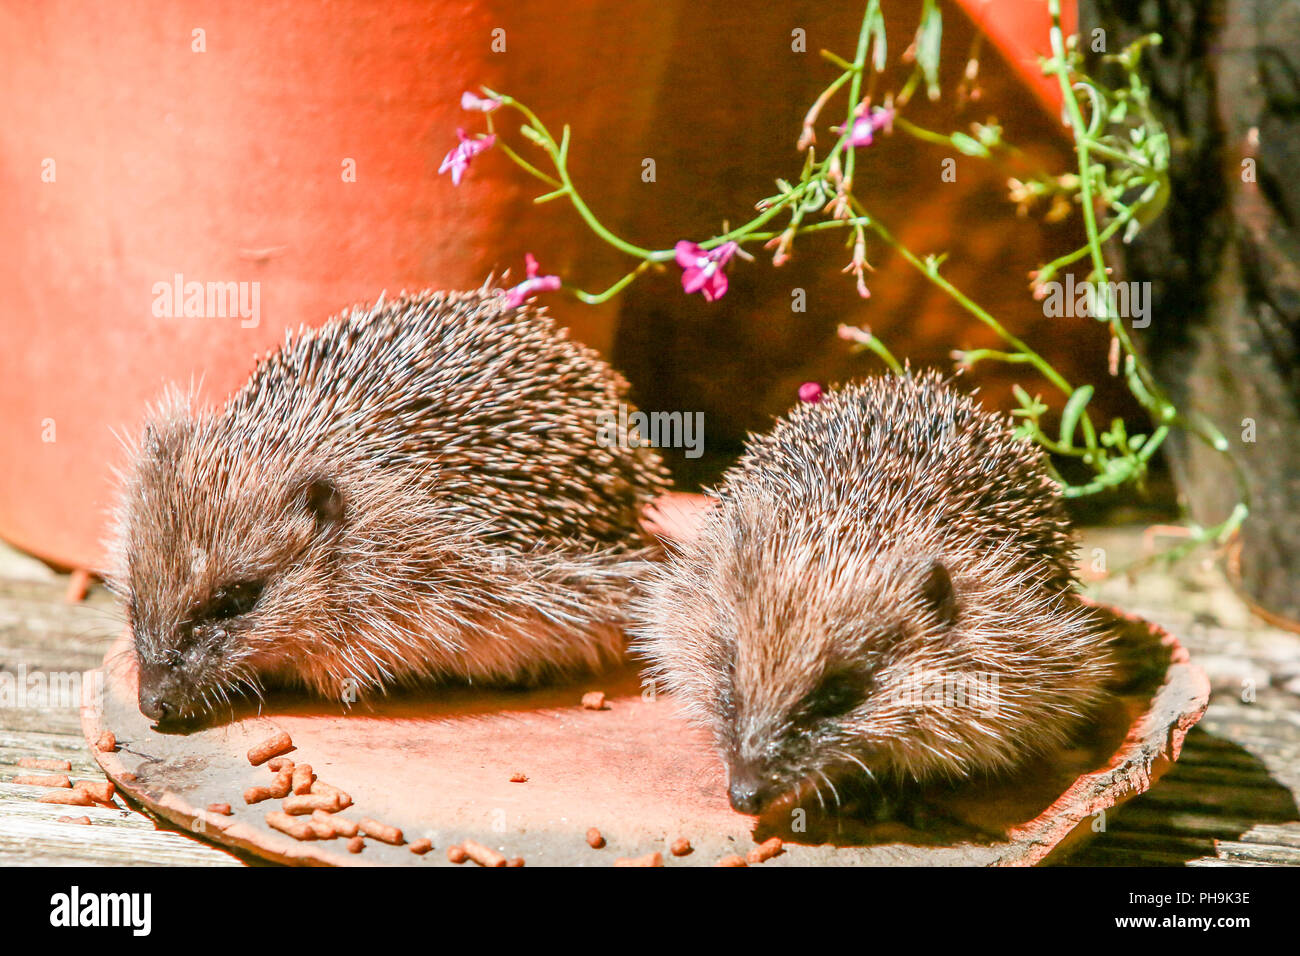 Native English hedgehog babies, or hoglets, eating in a suburban garden after dark Stock Photo